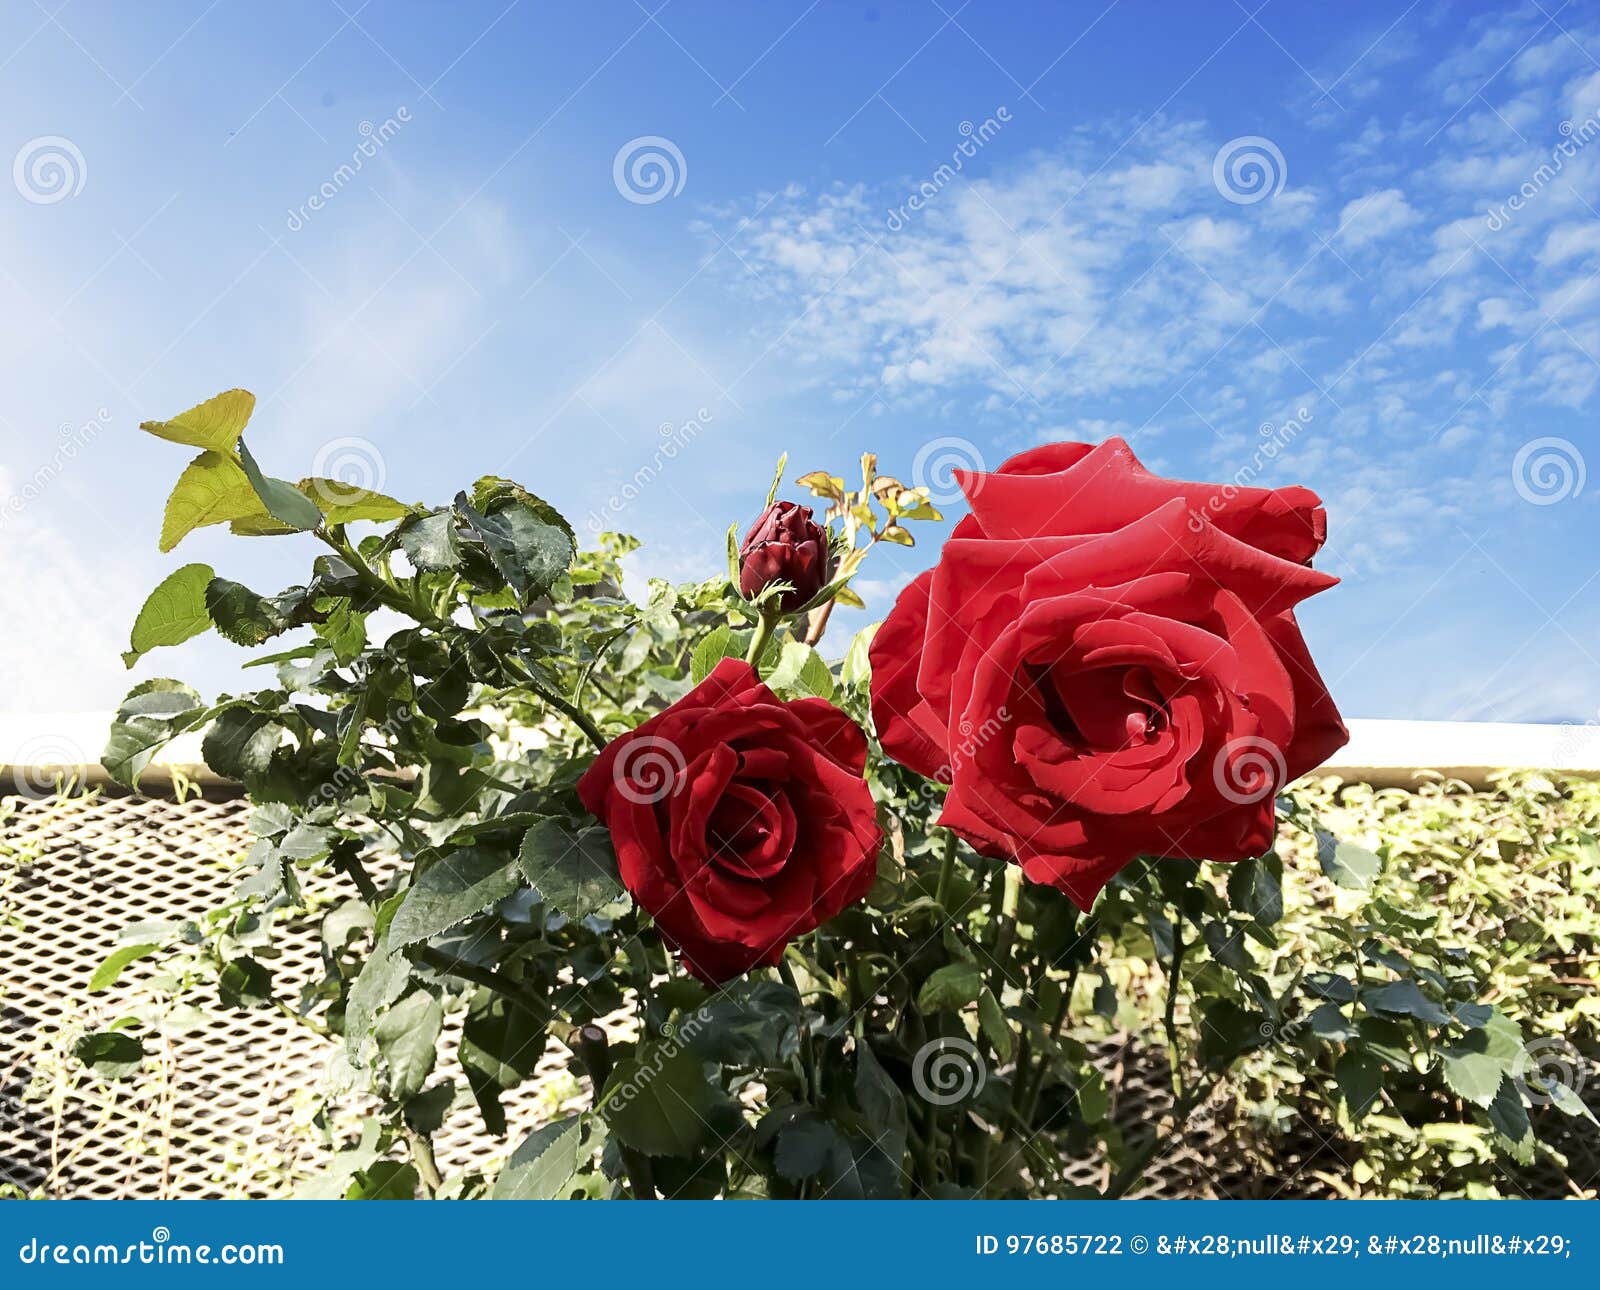 Two Beautiful Red Roses and the Morning Blue Stock Photo - Image of outdoor, green: 97685722